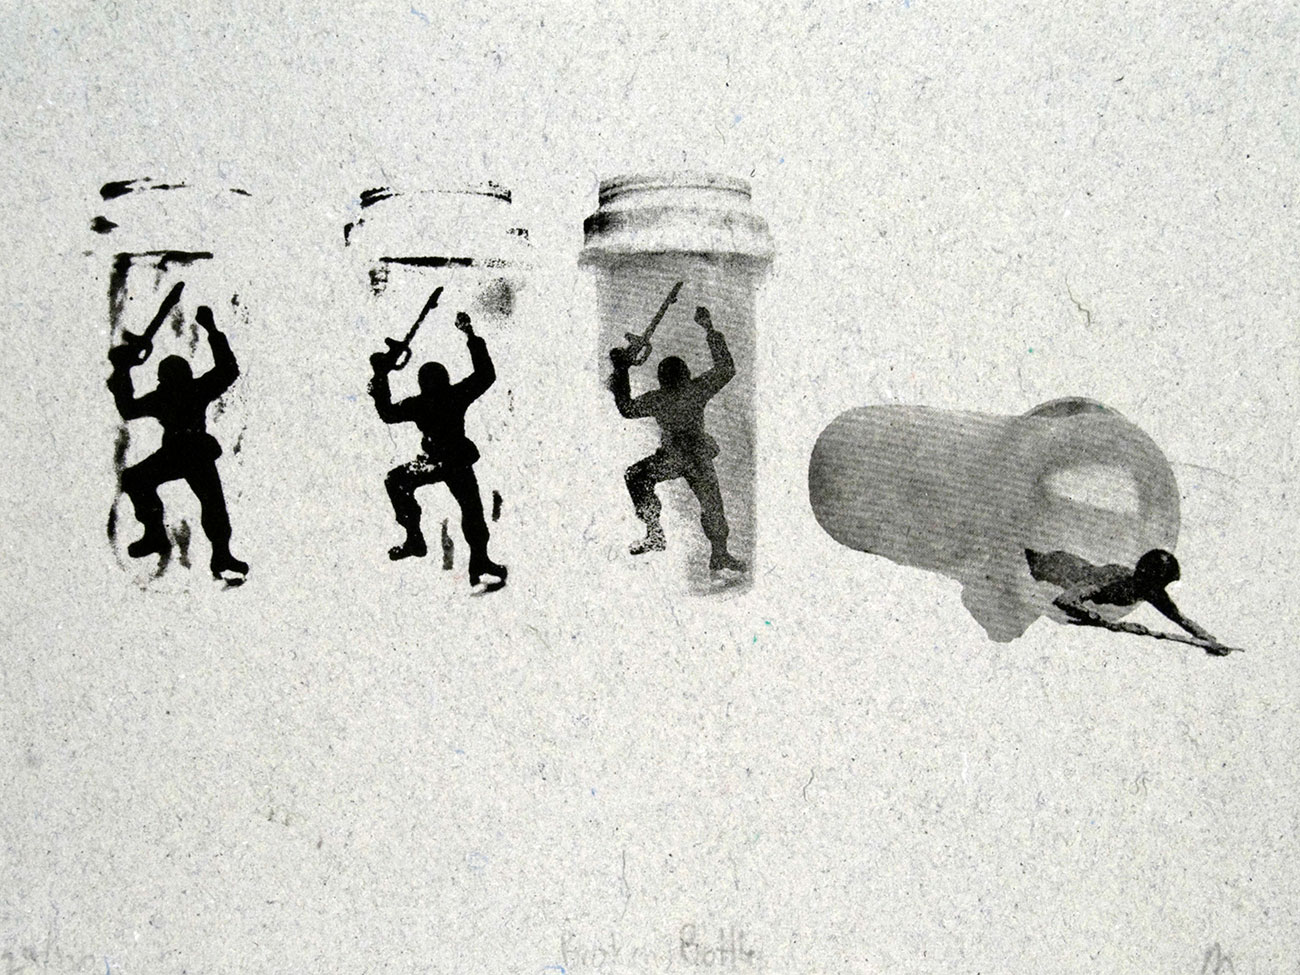 Pill Bottle Soldiers and Combat Paper by Malachi Muncy, lithograph